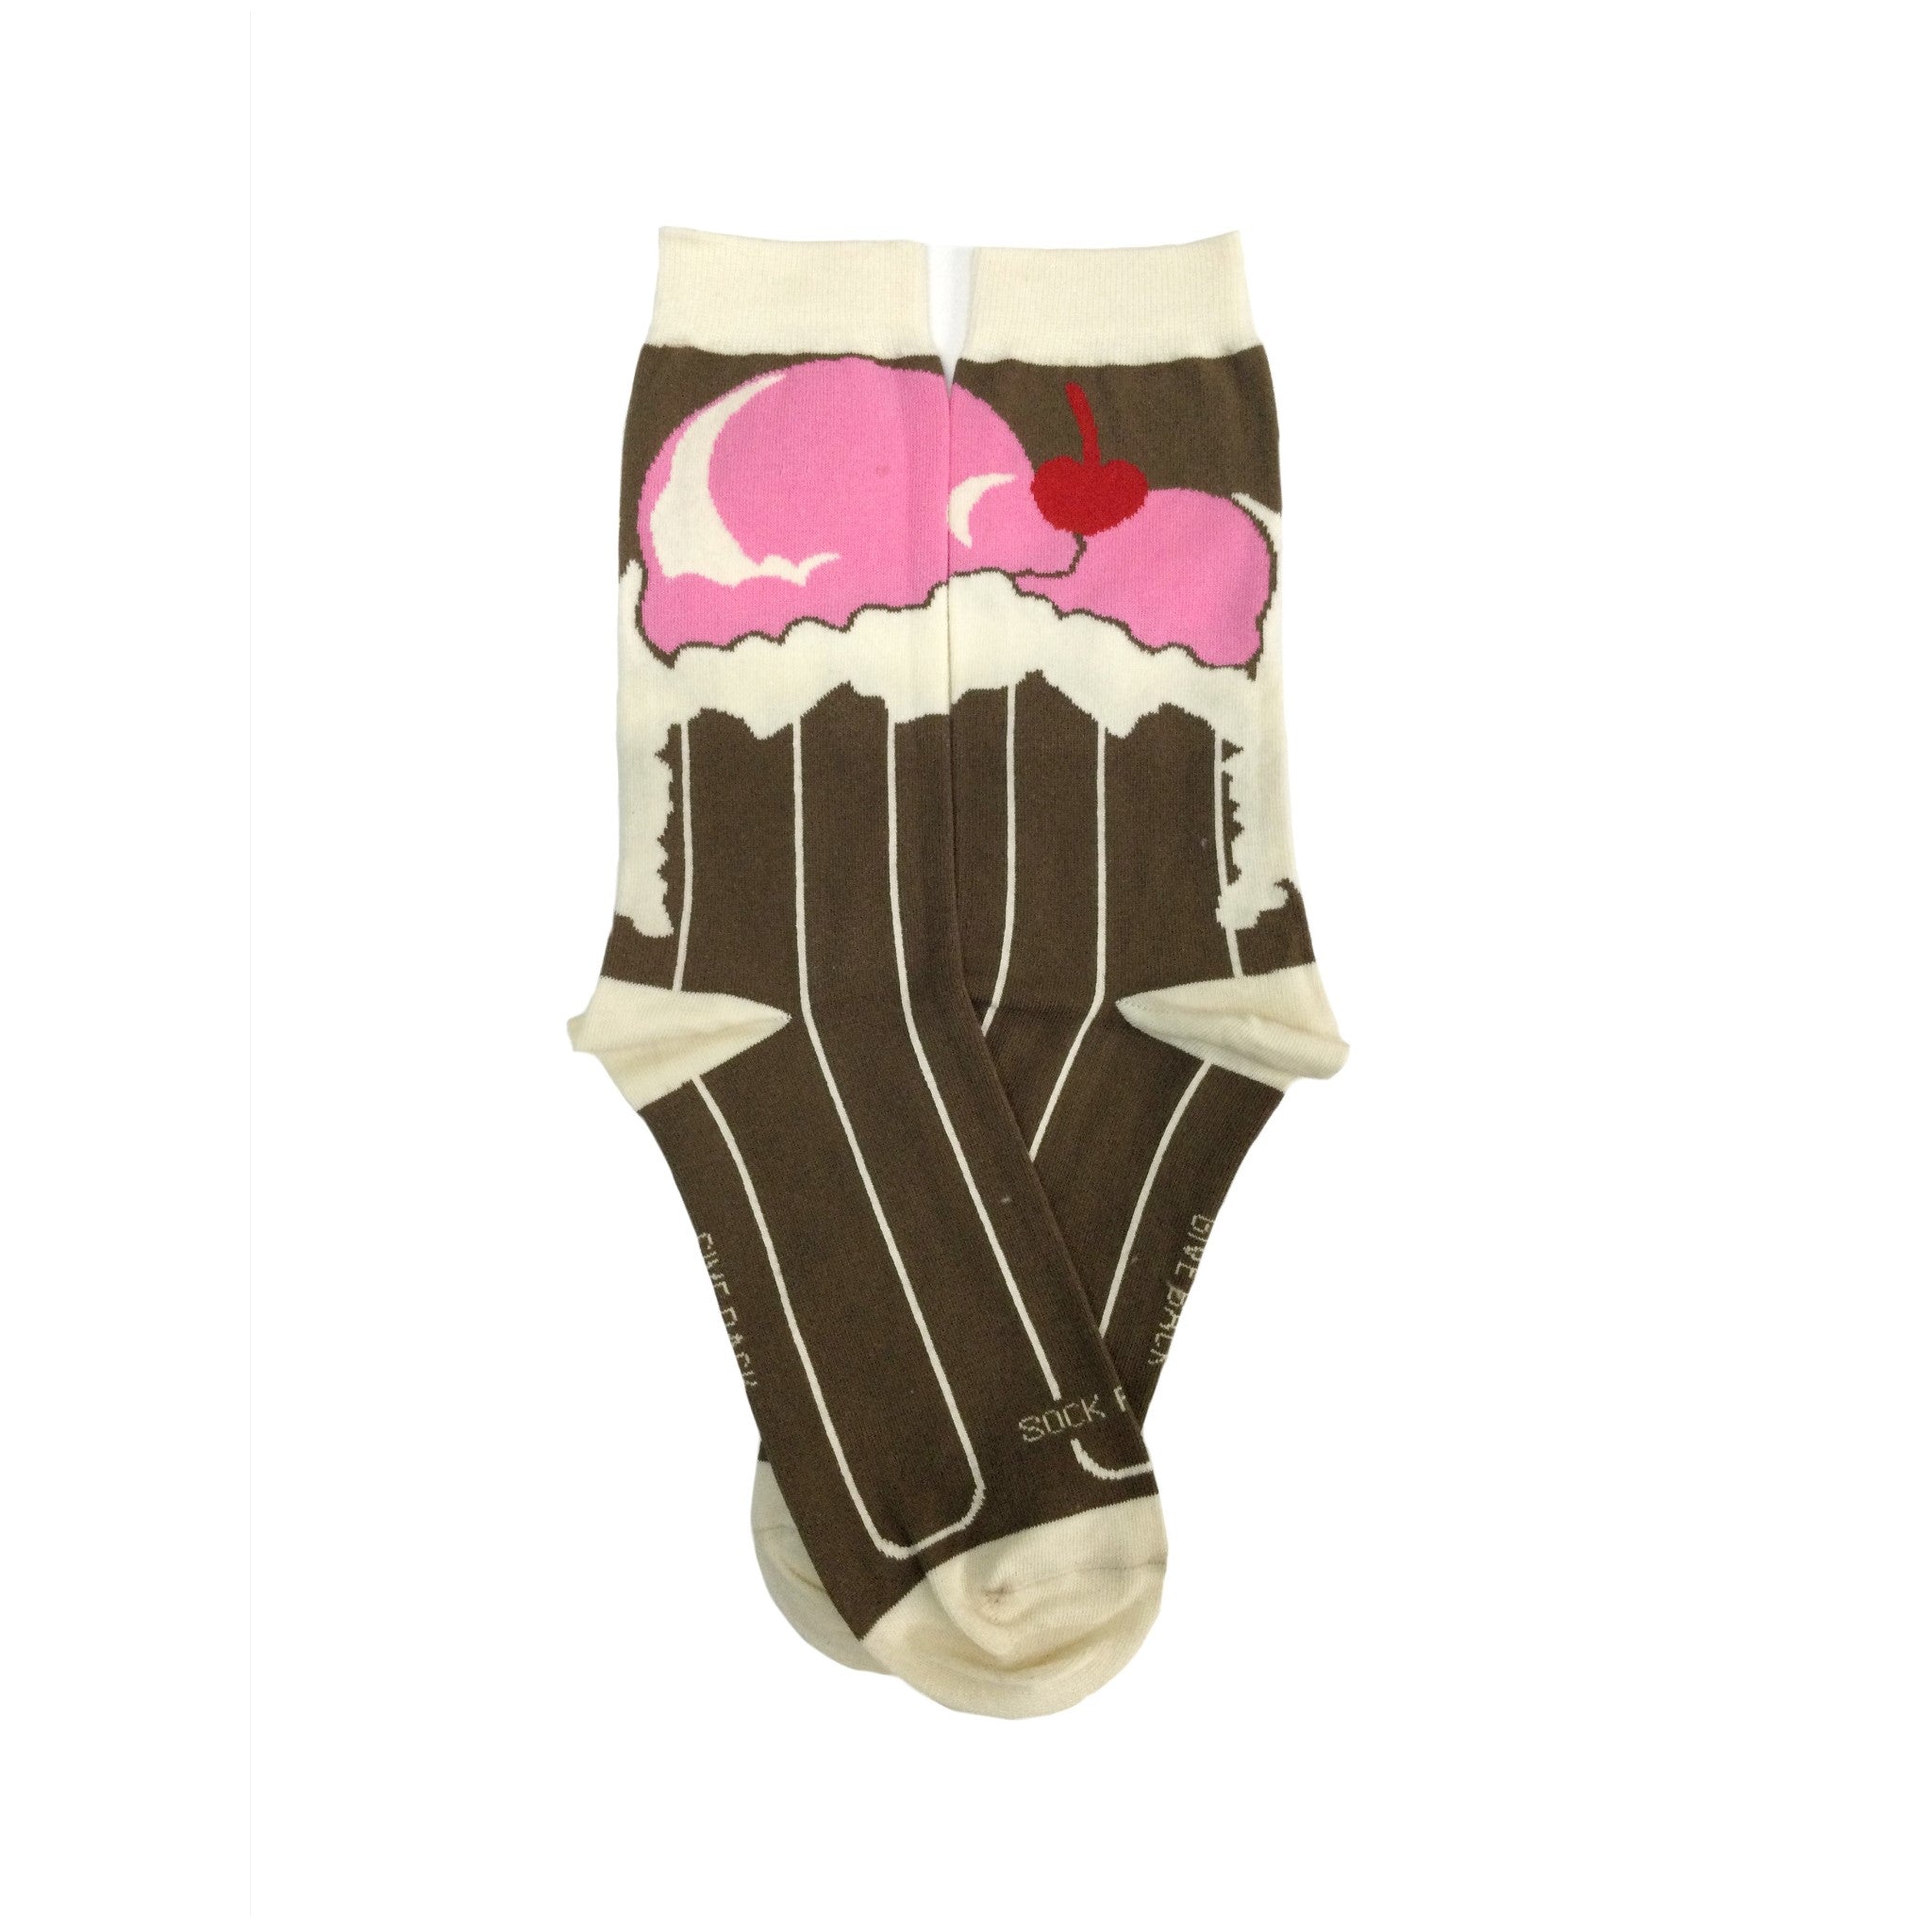 Root Beer Float Socks from the Sock Panda (Adult Large)